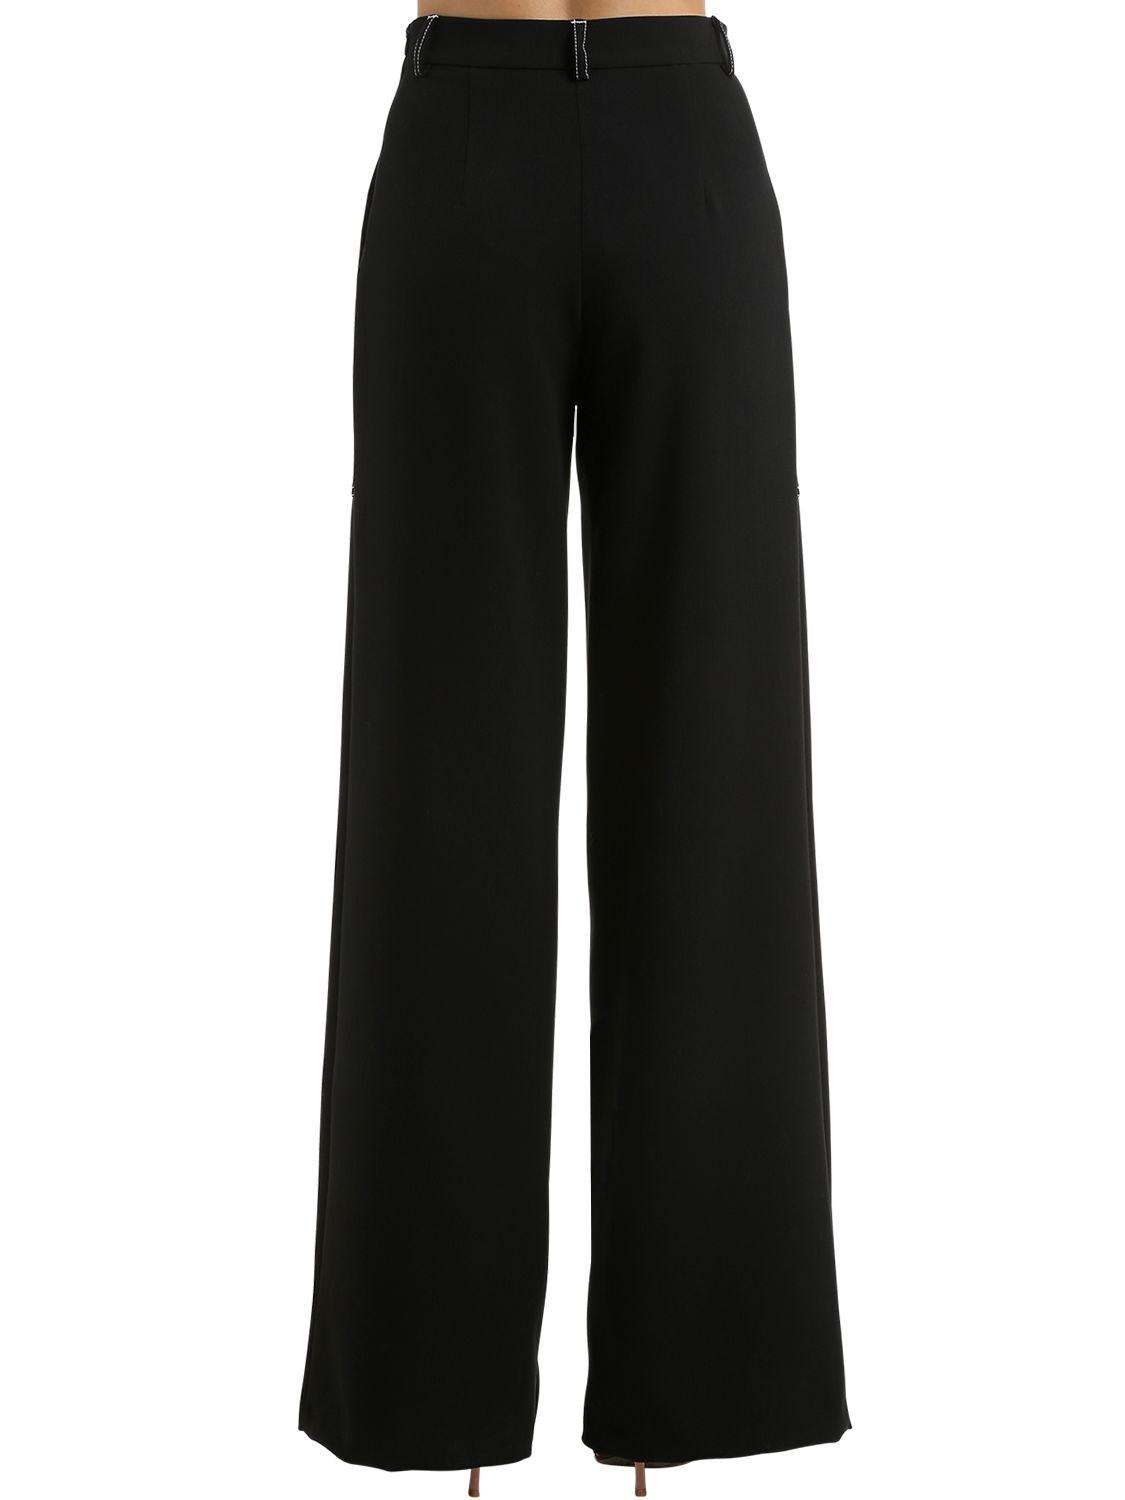 Vivetta Flared Tailored Trousers in Black - Lyst